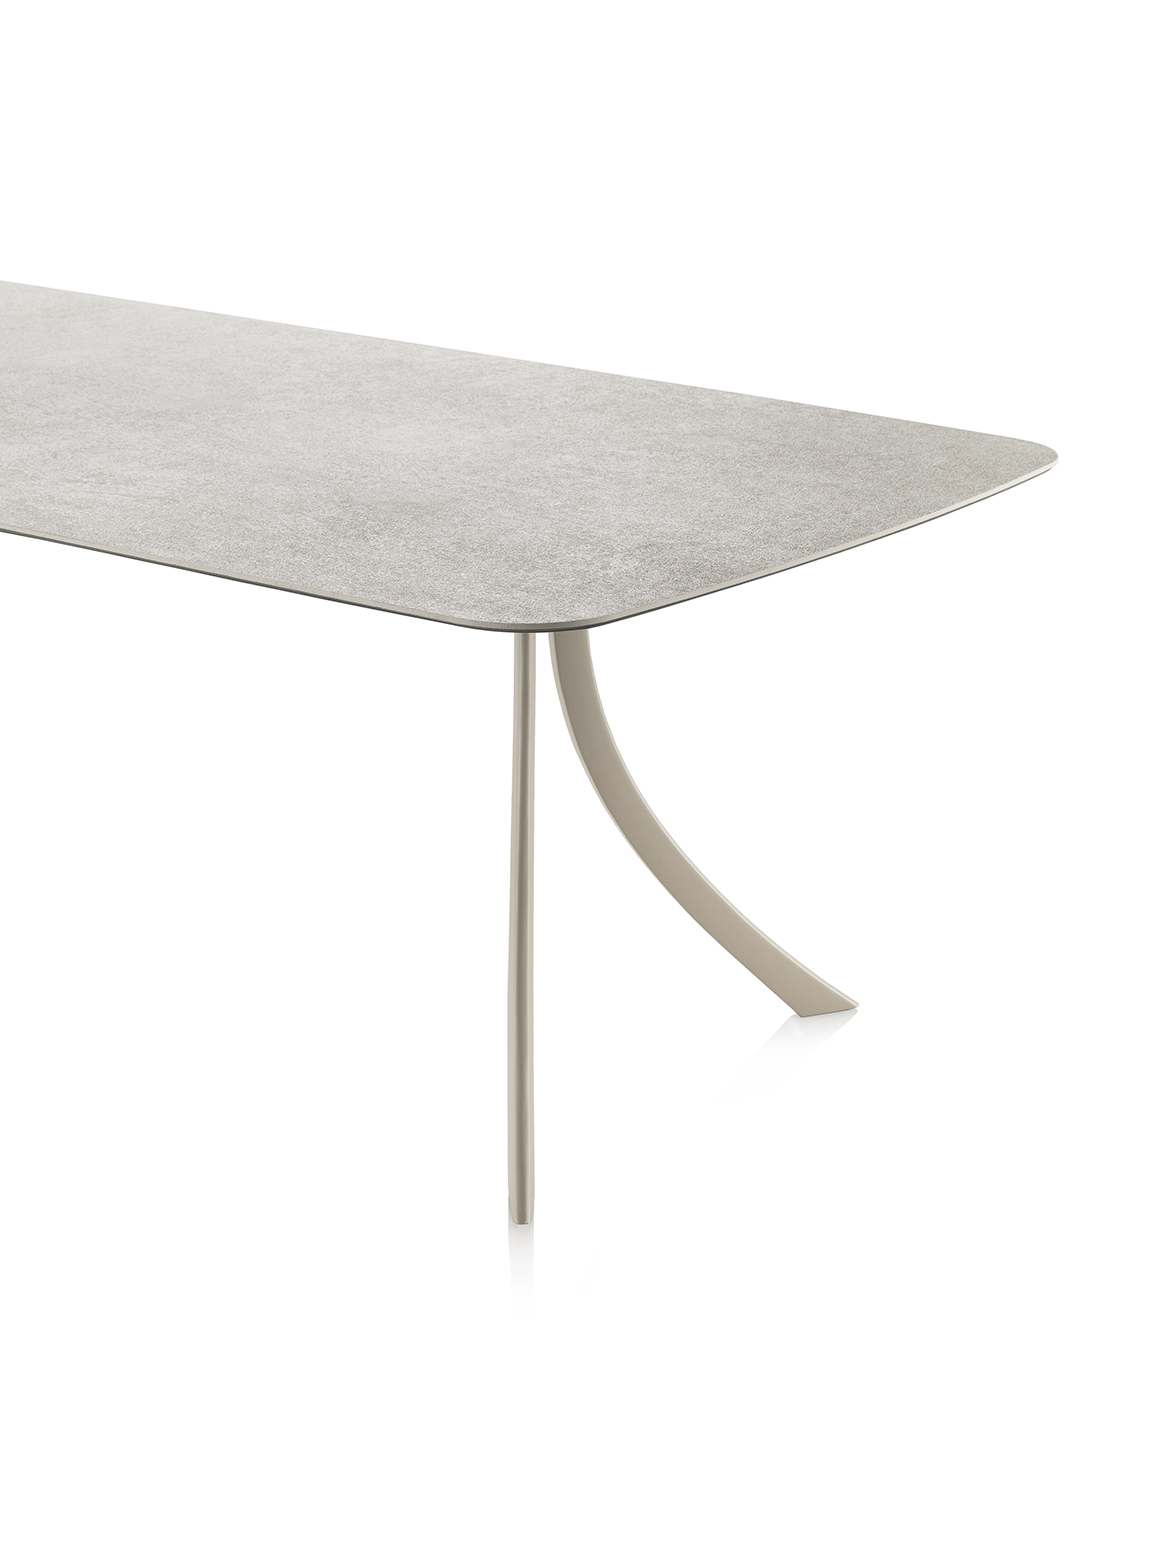 Falcata dining table by Lievore Altherr Molina 05